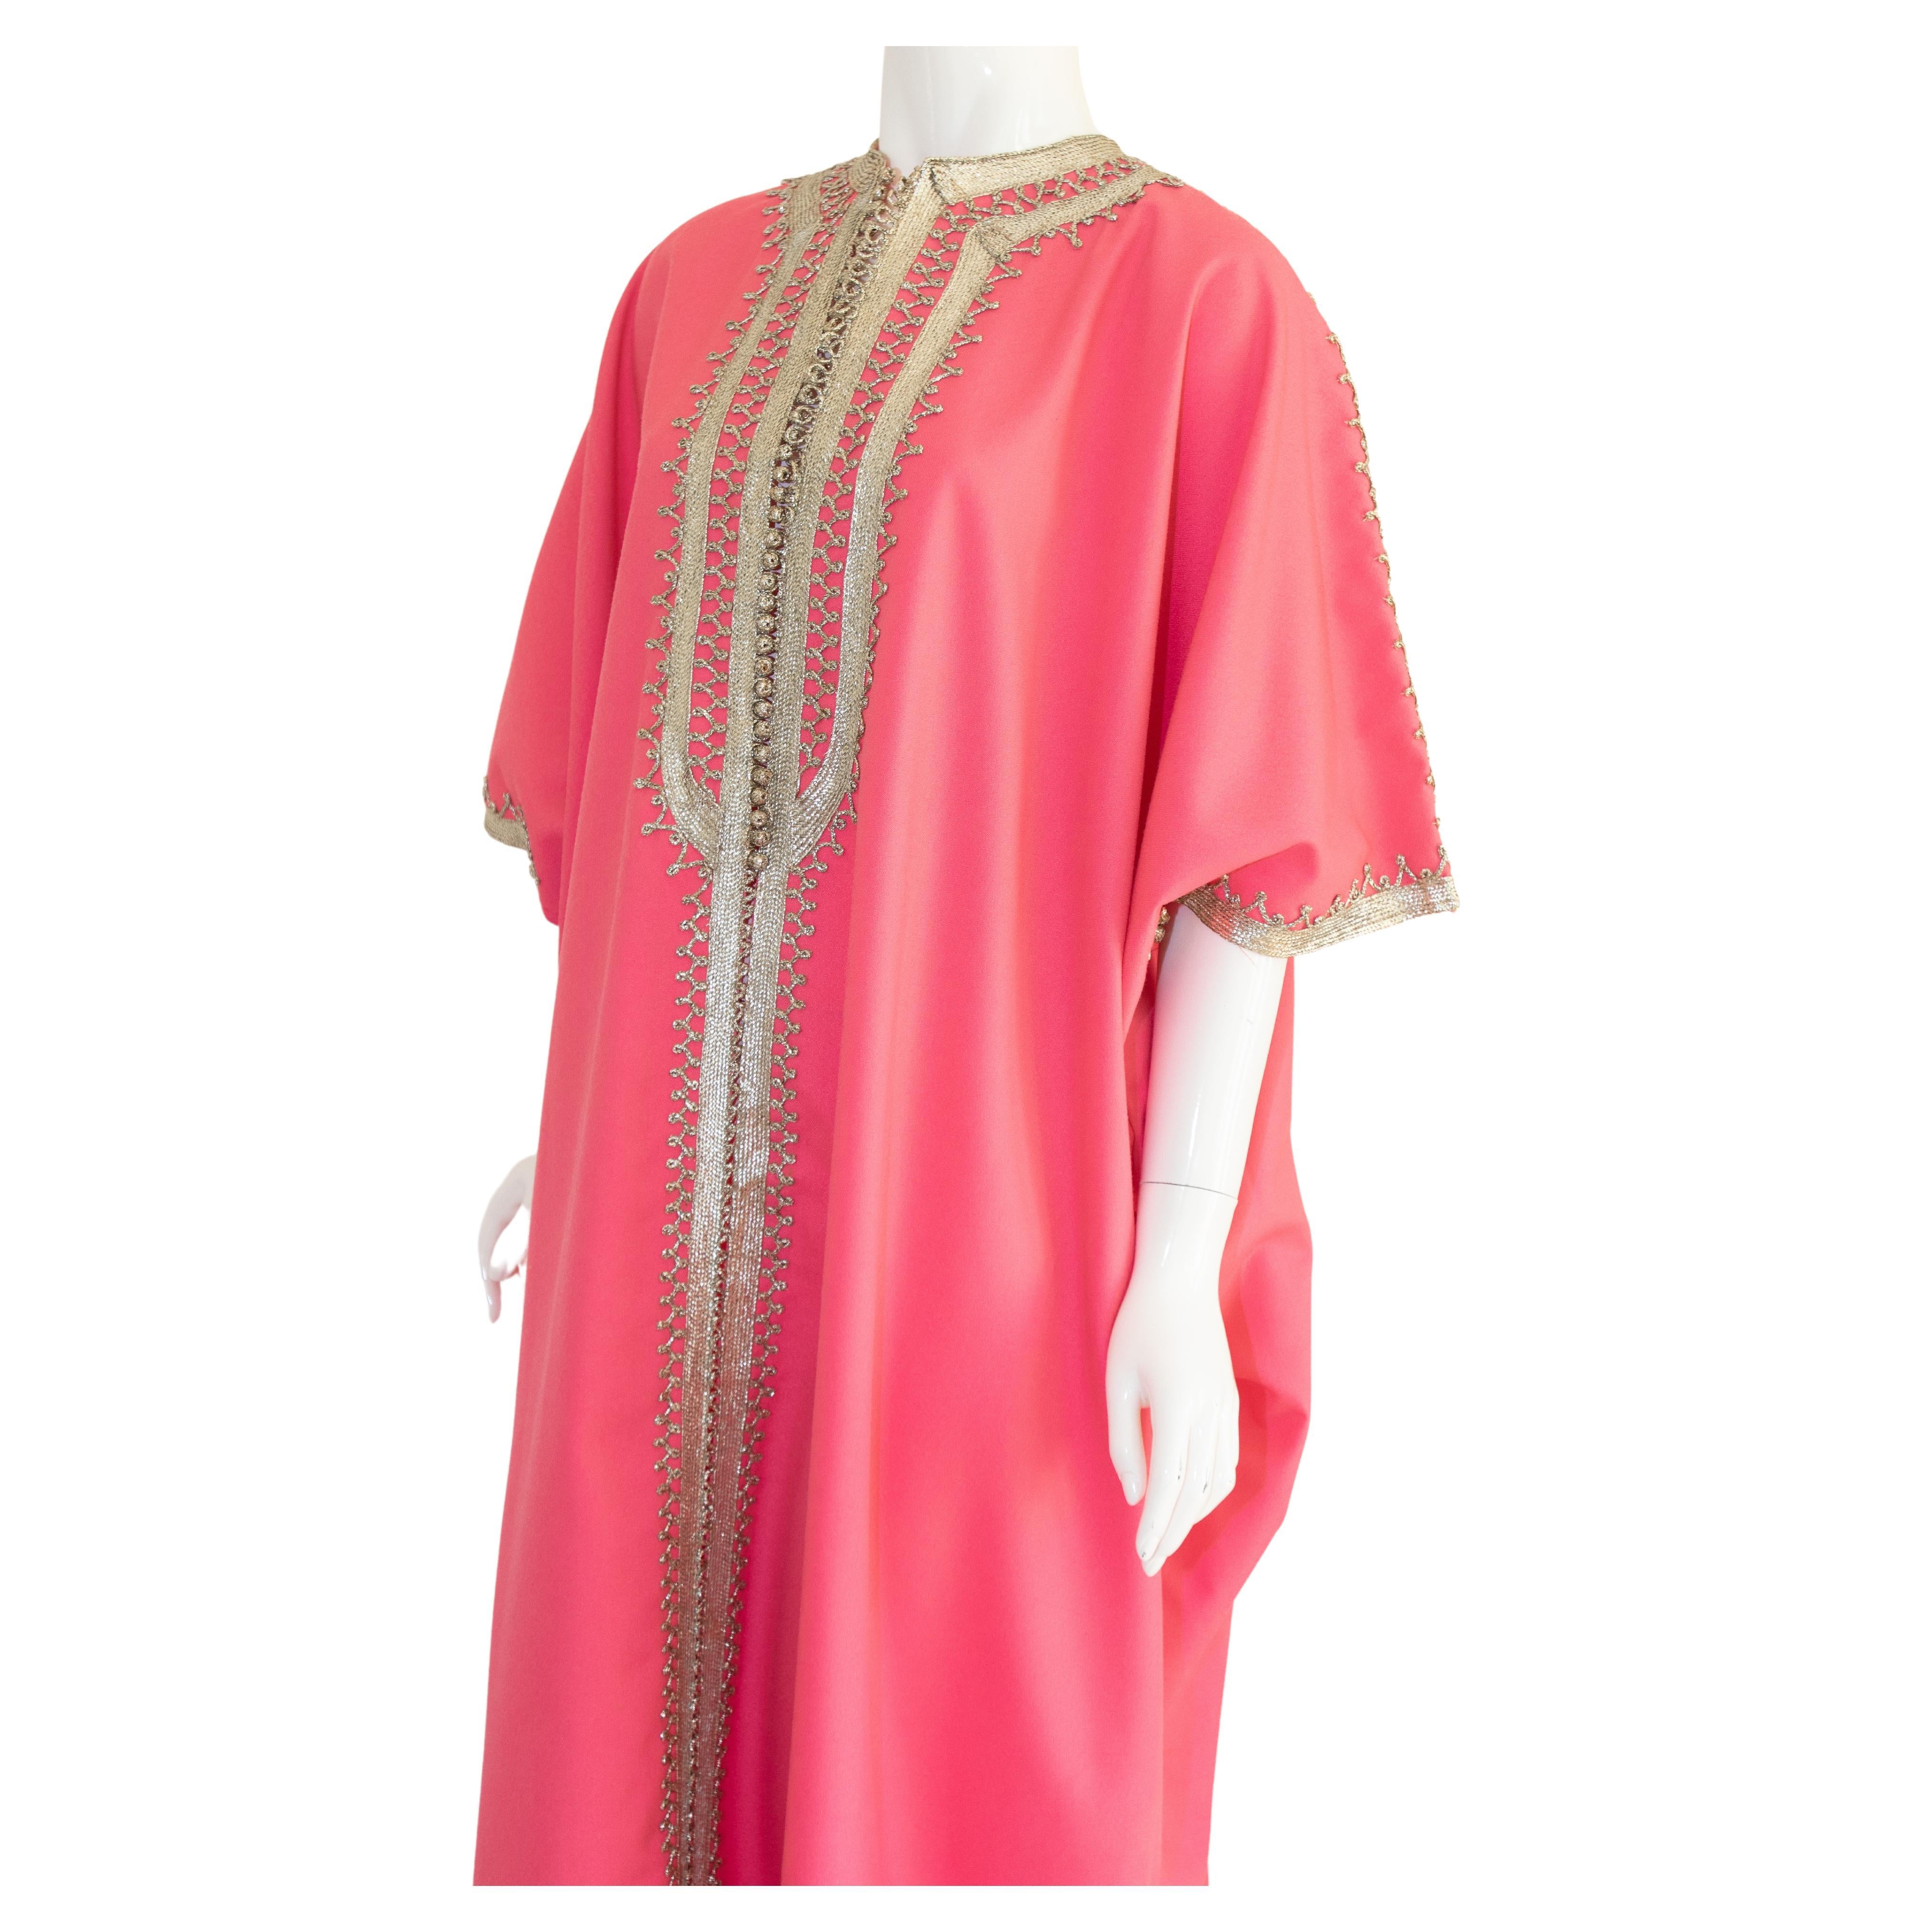 Elegant Moroccan caftan hot pink color embroidered with silver metallic threads, circa 1970s. 
This long maxi poly jersey dress kaftan is embroidered and embellished with traditional designs in silver.
One of a kind evening vintage Moroccan Middle